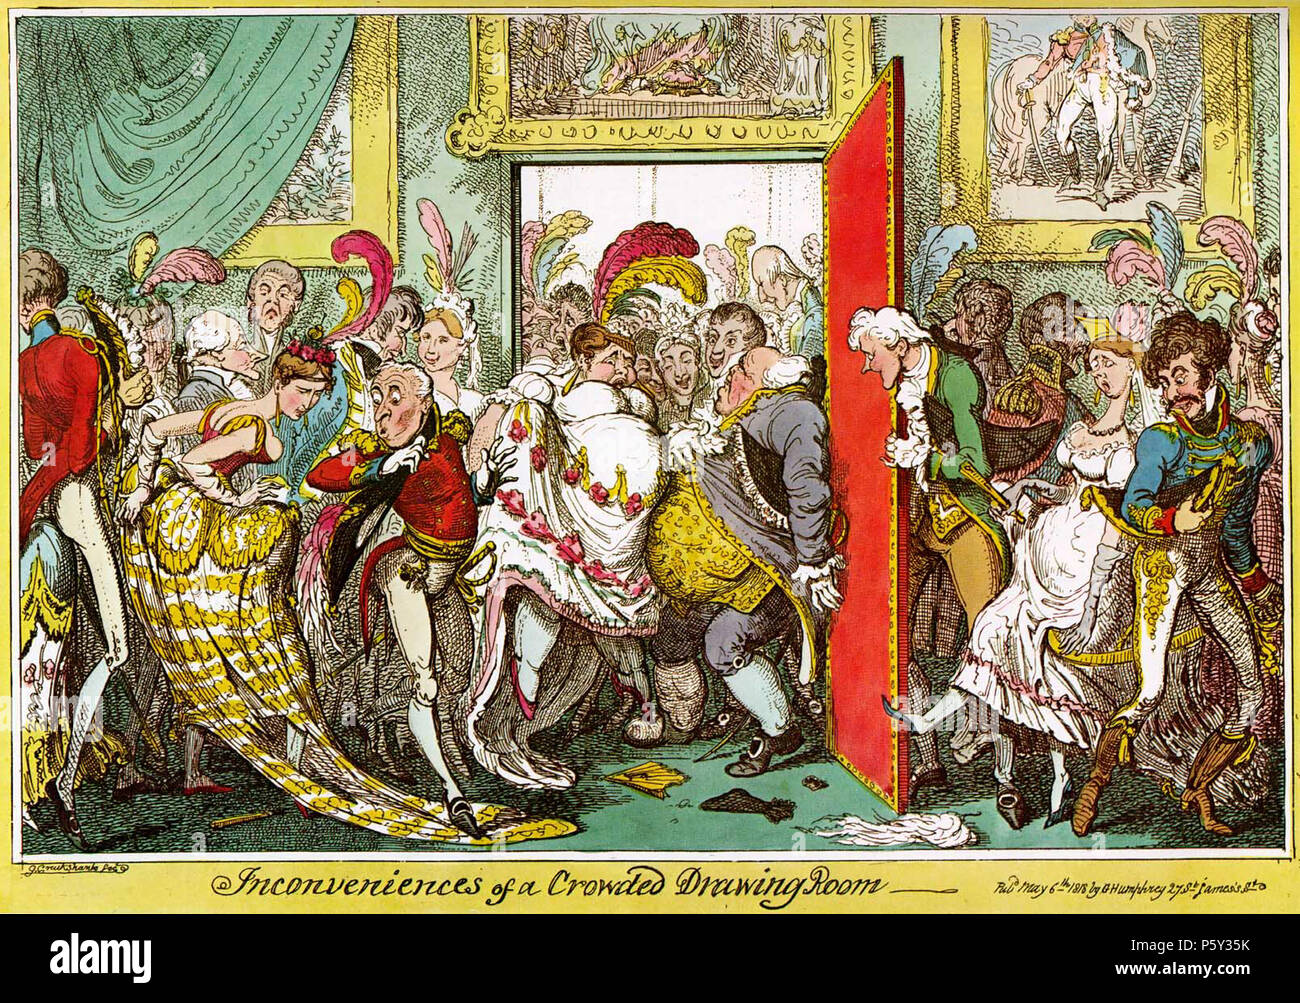 N/A. 'The inconveniences of a crowded drawing room', a famous May 6th 1818 caricature by George Cruikshank. Shows a crowded royal 'drawing room' reception (in a London palace). The woman at the left (whose train is being stepped on) is wearing the old-fashioned hooped 'court dress' (abolished 1820), while the man in the door is wearing formal breeches (many of the other men are wearing military uniforms). The moustache of the man on the right had connotations of foreign (Continental) and/or military dandyism at the time. 6 May 1818.   George Cruikshank  (1792–1878)      Alternative names Georg Stock Photo